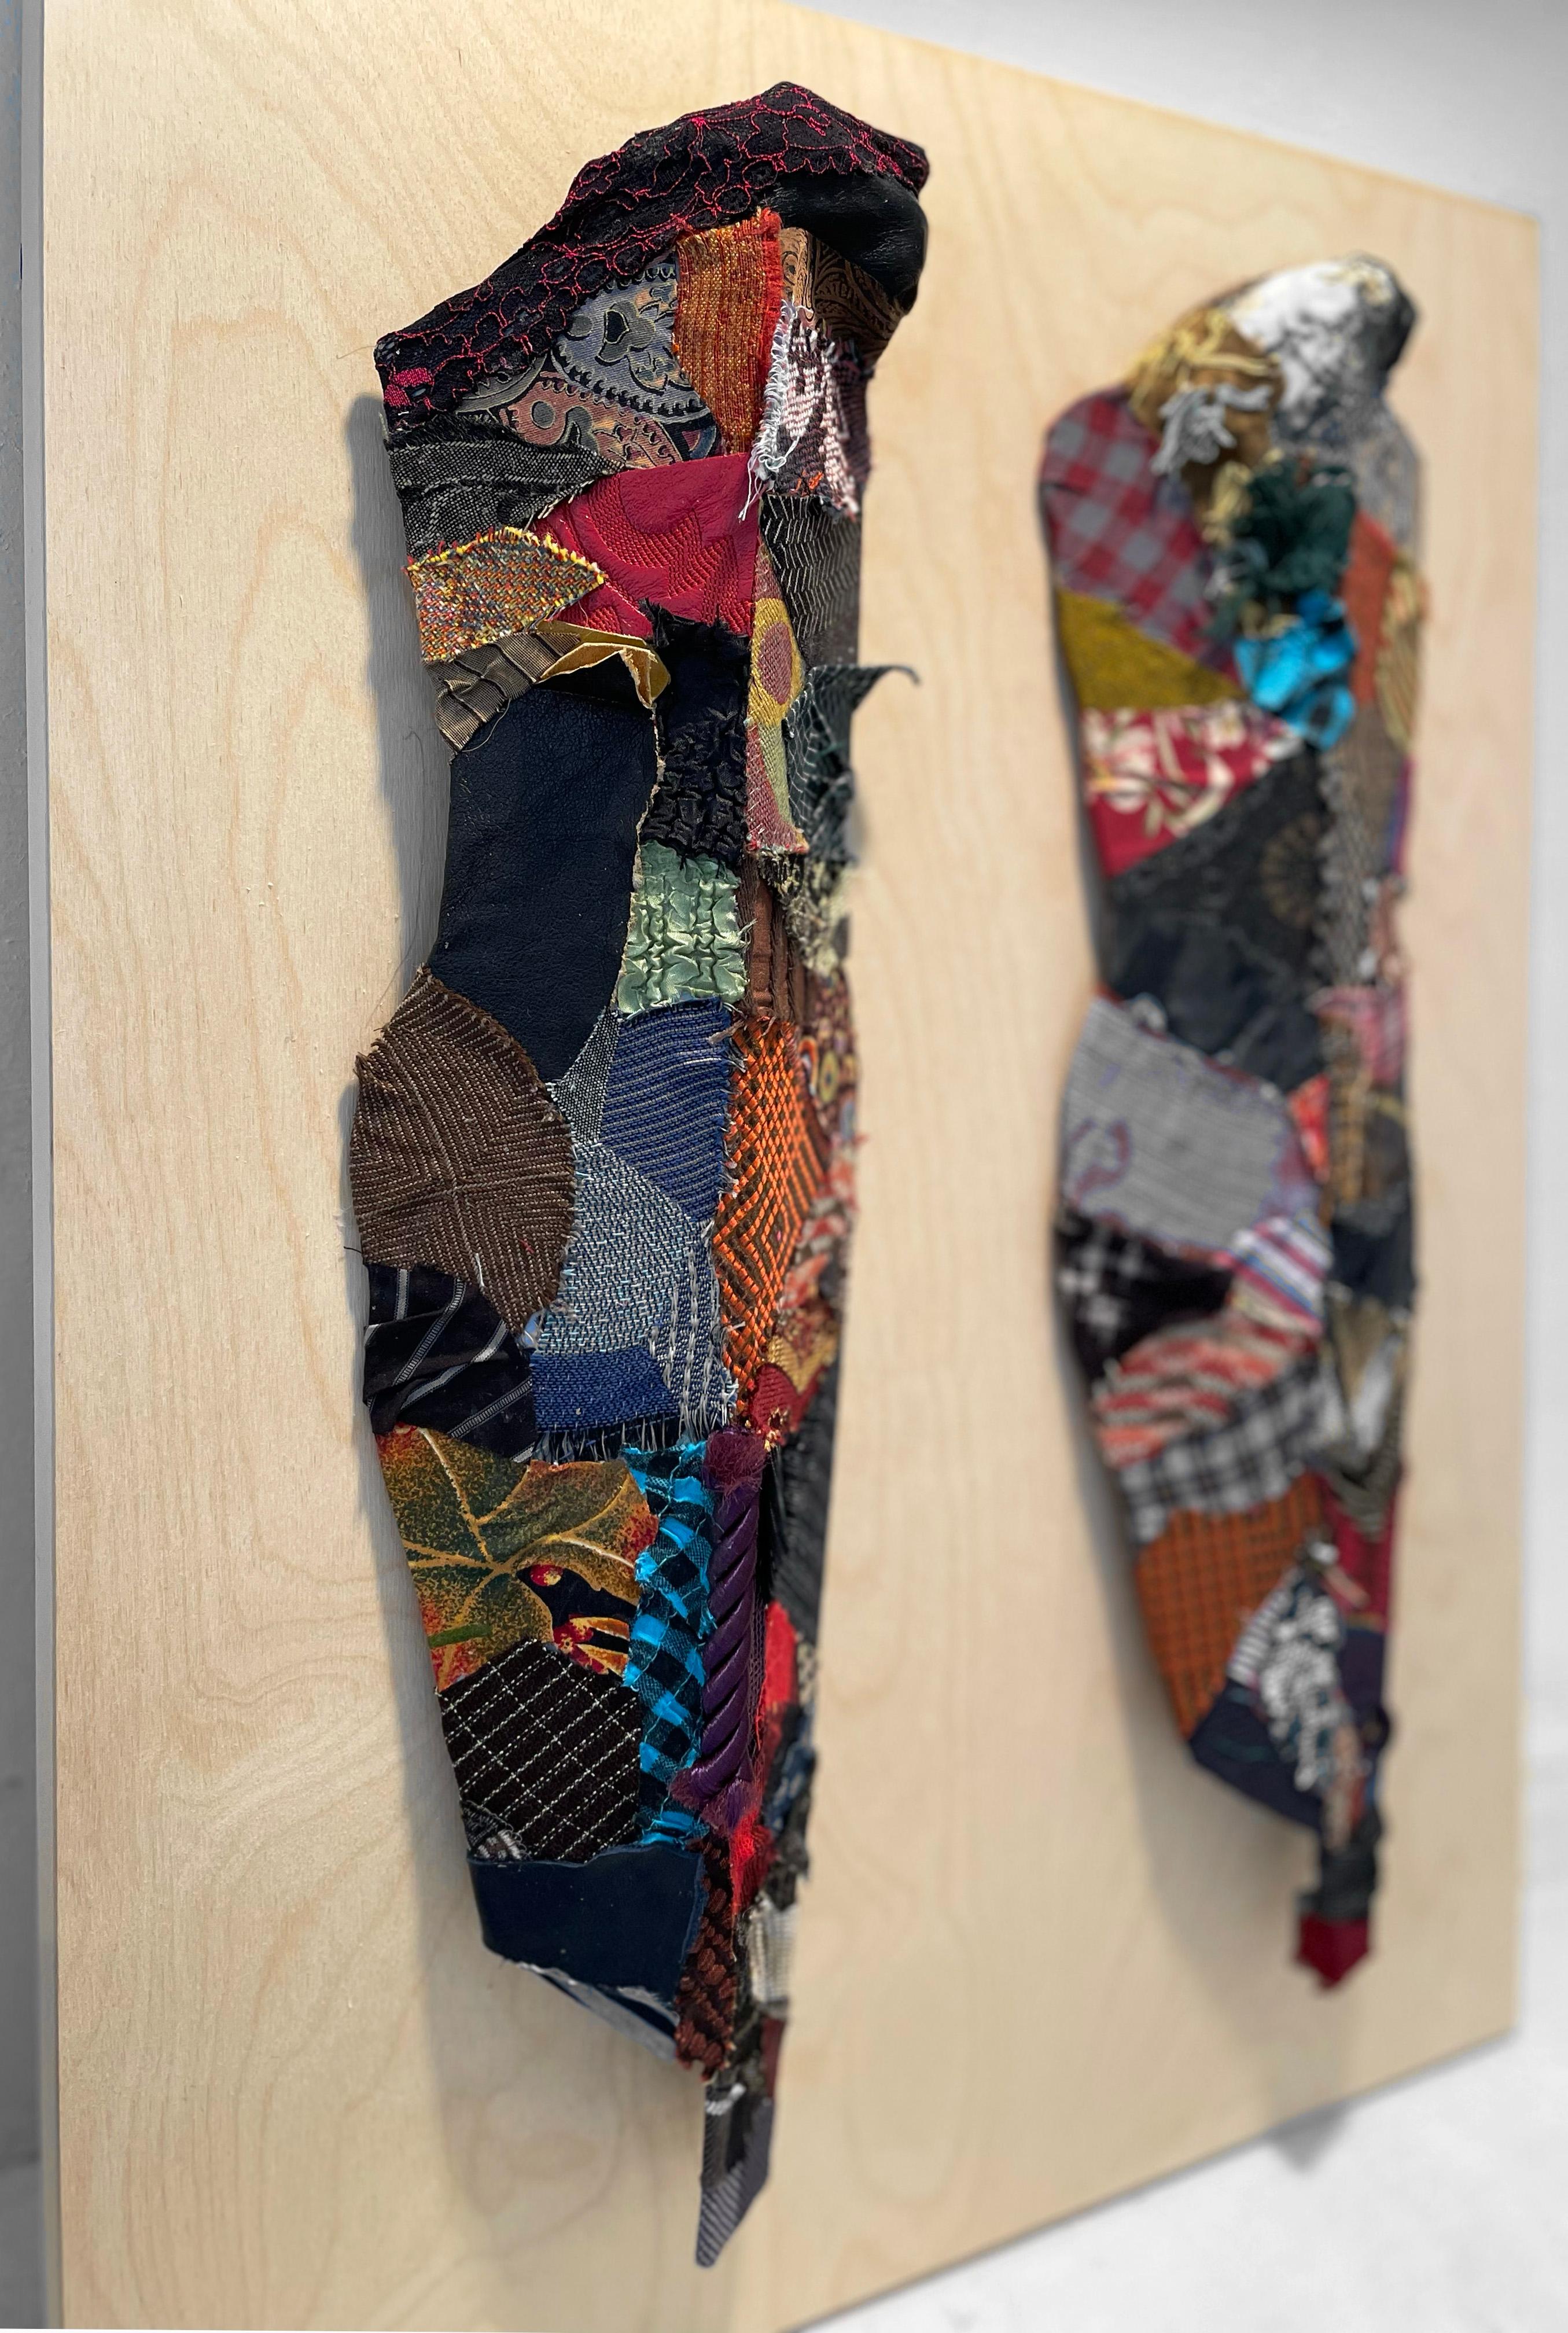 Linda Stein, 1219 - Contemporary Art 3D Mixed Media Fabric Sculptural Collage

Linda Stein started her Knights of Protection series after she was forced to evacuate her New York downtown studio for a year post-9/11.  Stein's Knights are shield-like